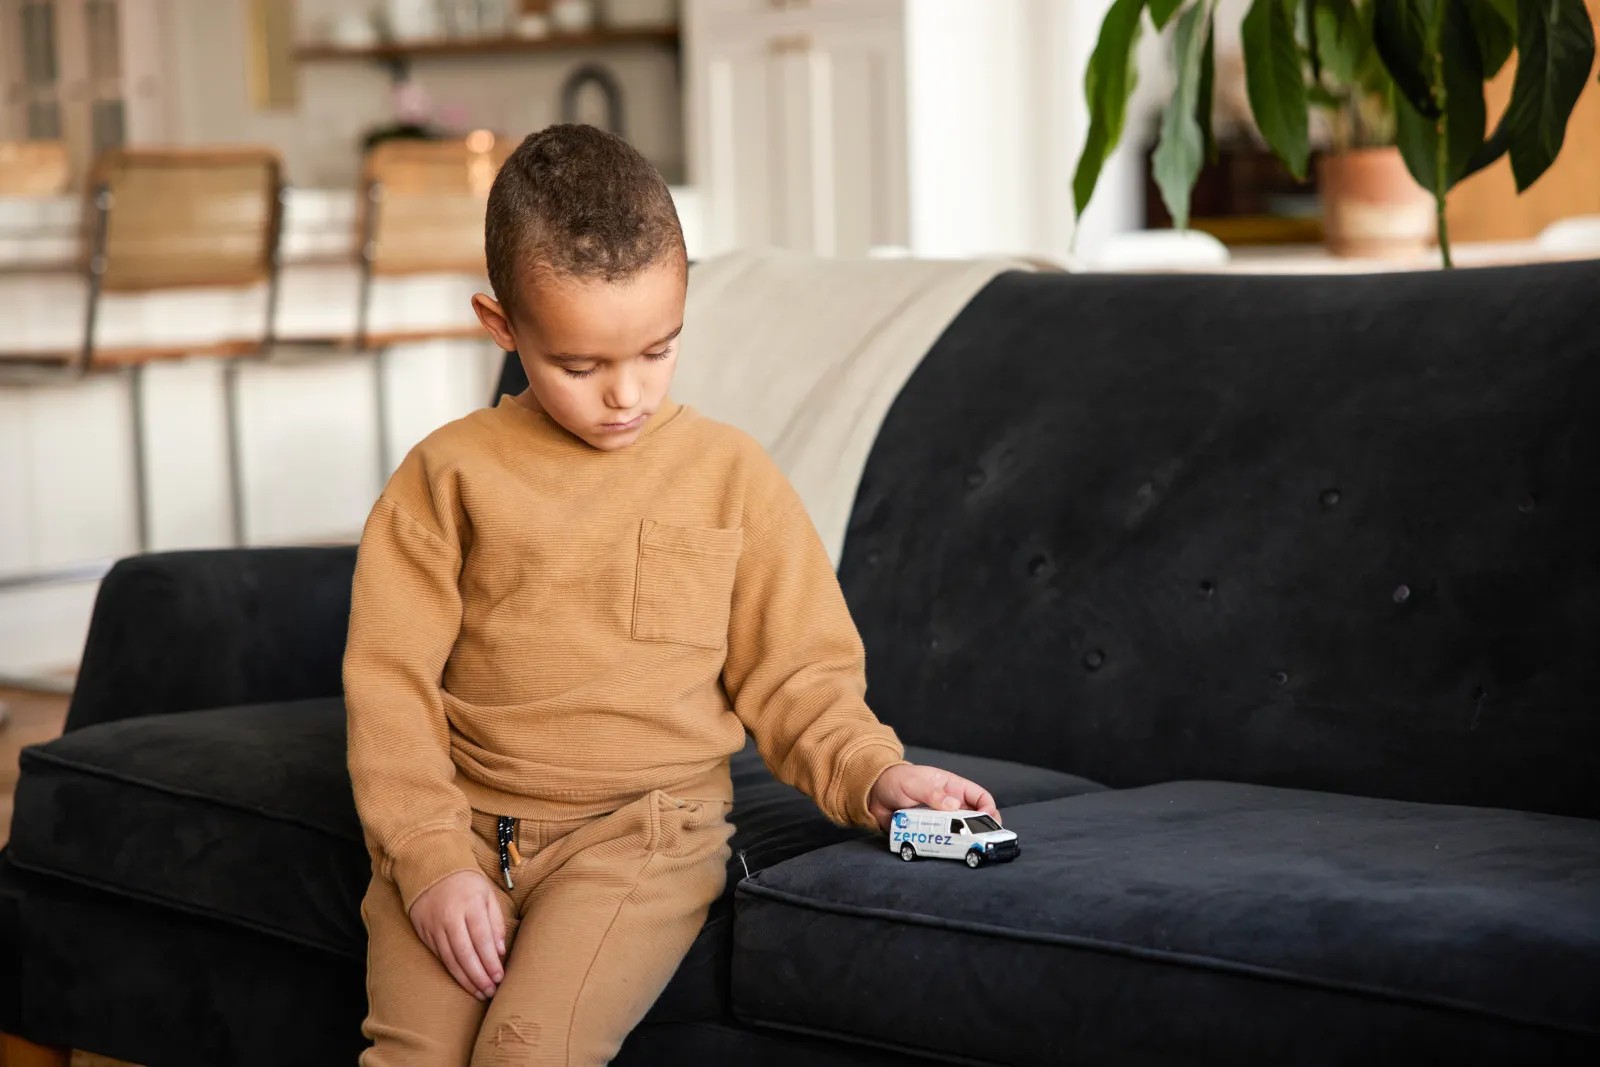 a little boy in a tan sweat suit sitting on a suede couch playing with a small Zerorez toy van